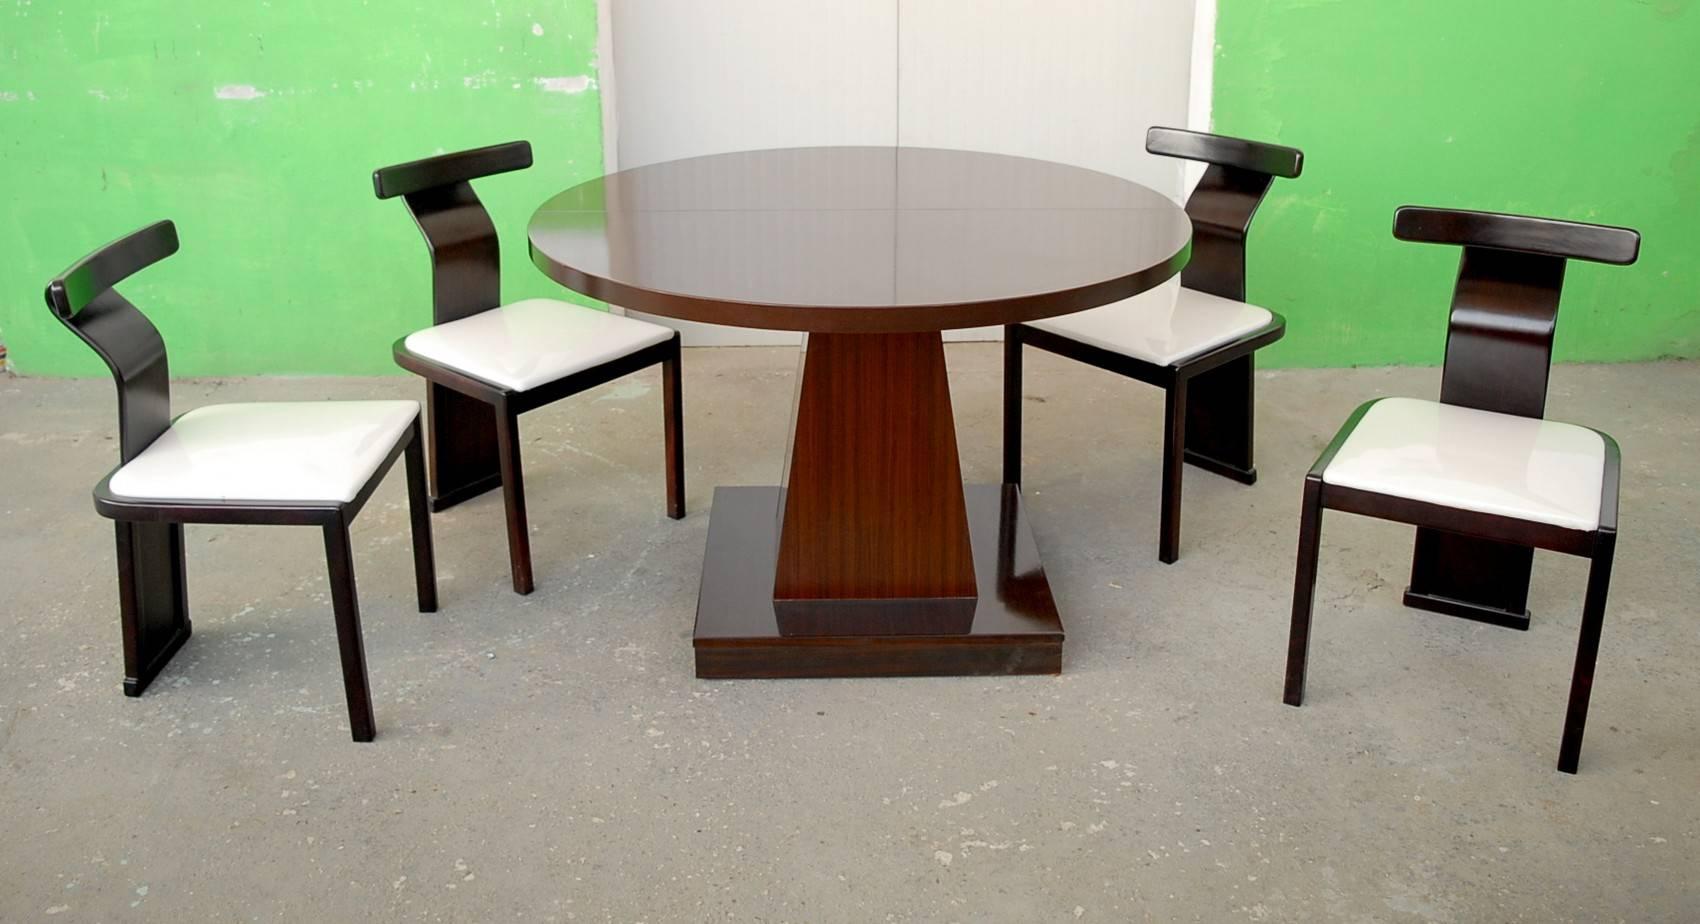 Four Chairs and Table Midcentury Set, Saporiti, Introini and Willy Rizzo Design 8